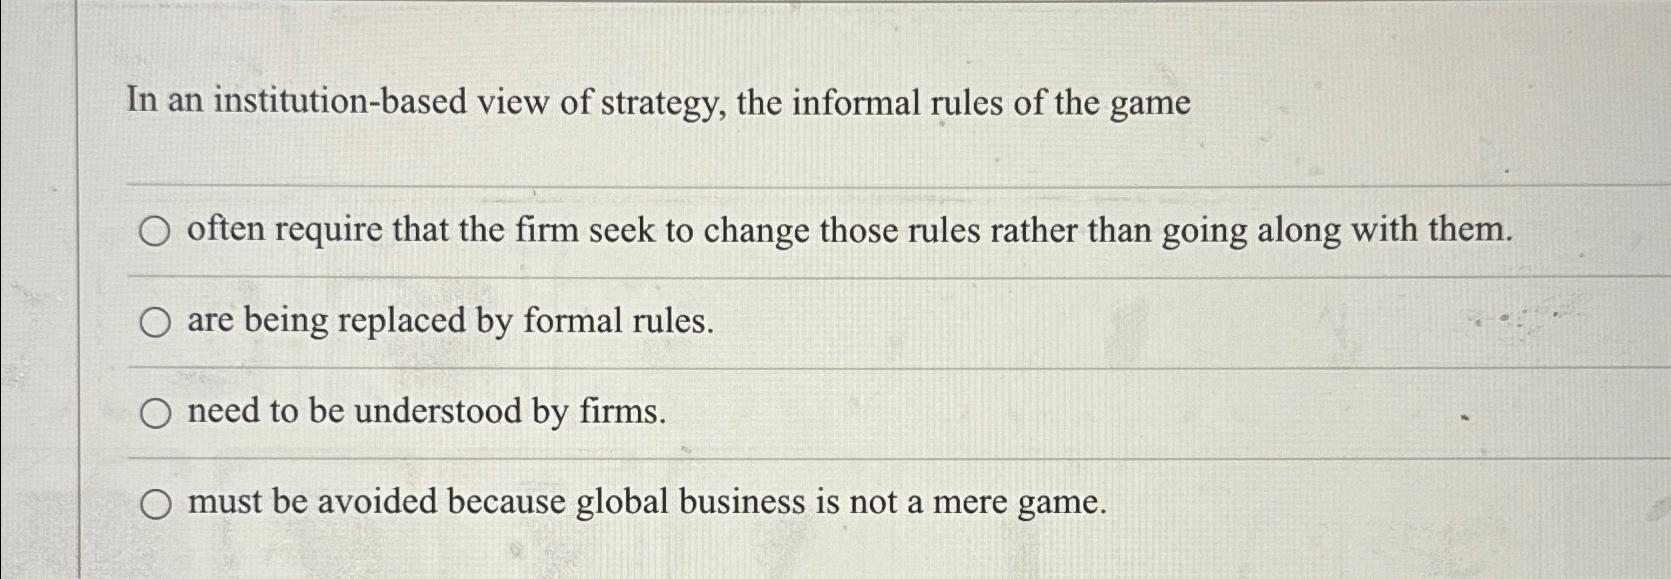 In an institution-based view of strategy, the informal rules of the game O often require that the firm seek